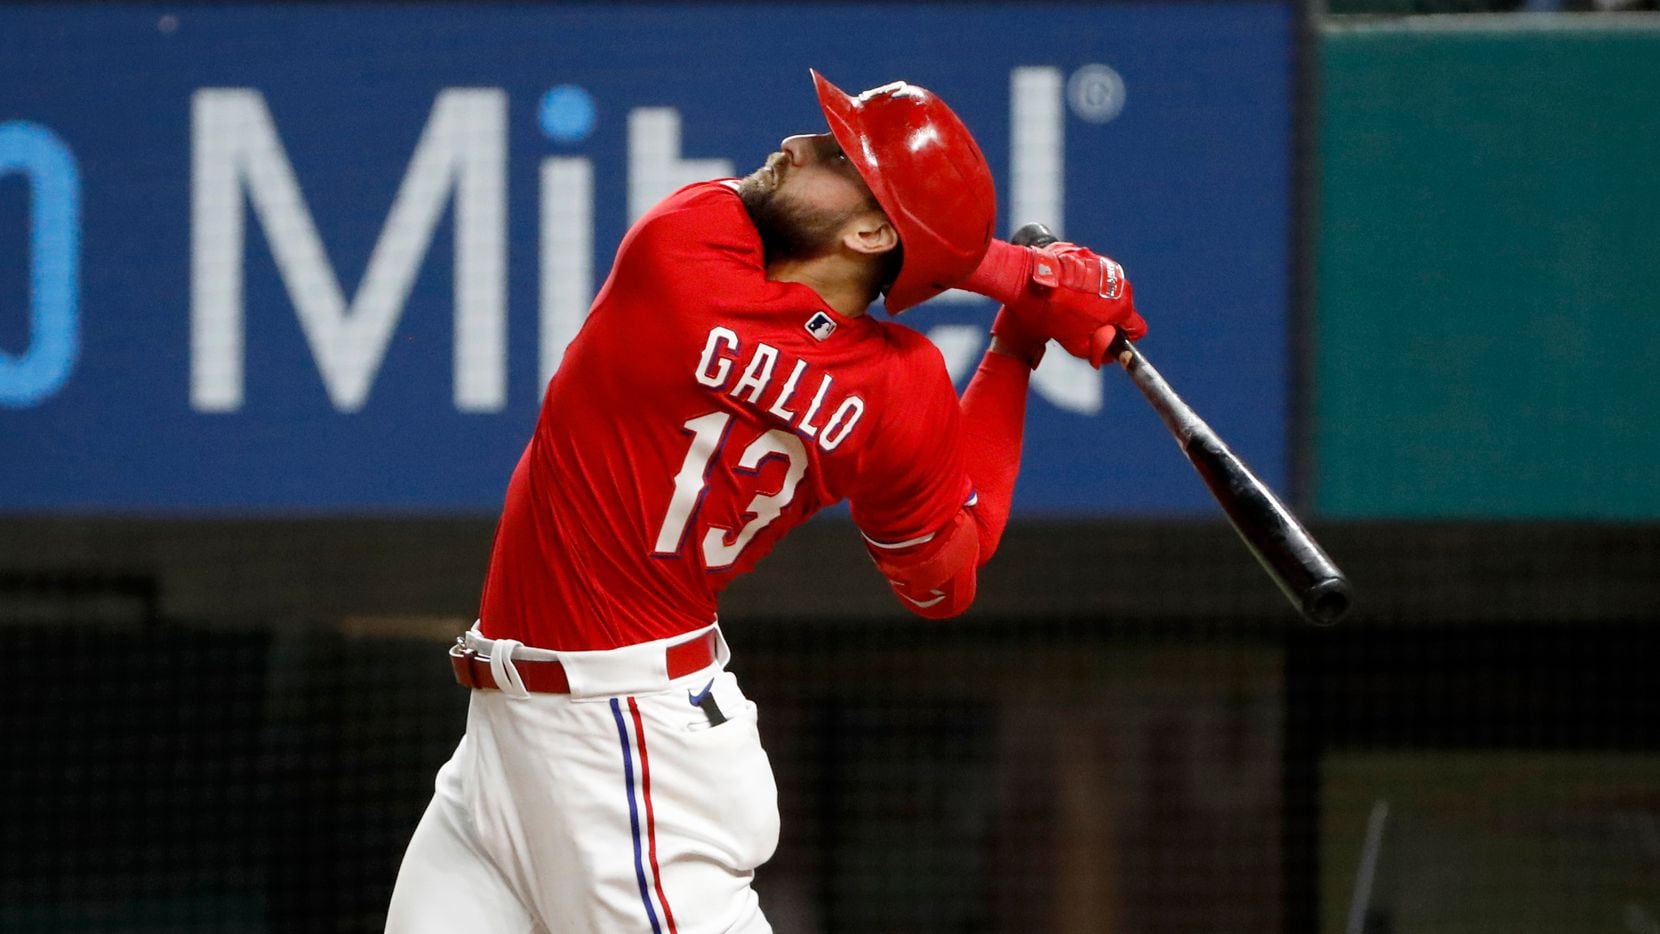 Texas Rangers Joey Gallo watches a fly ball during the ninth inning of a baseball game against the Baltimore Orioles in Arlington, Texas, Friday, April 16, 2021. Texas lost the game 5-2.